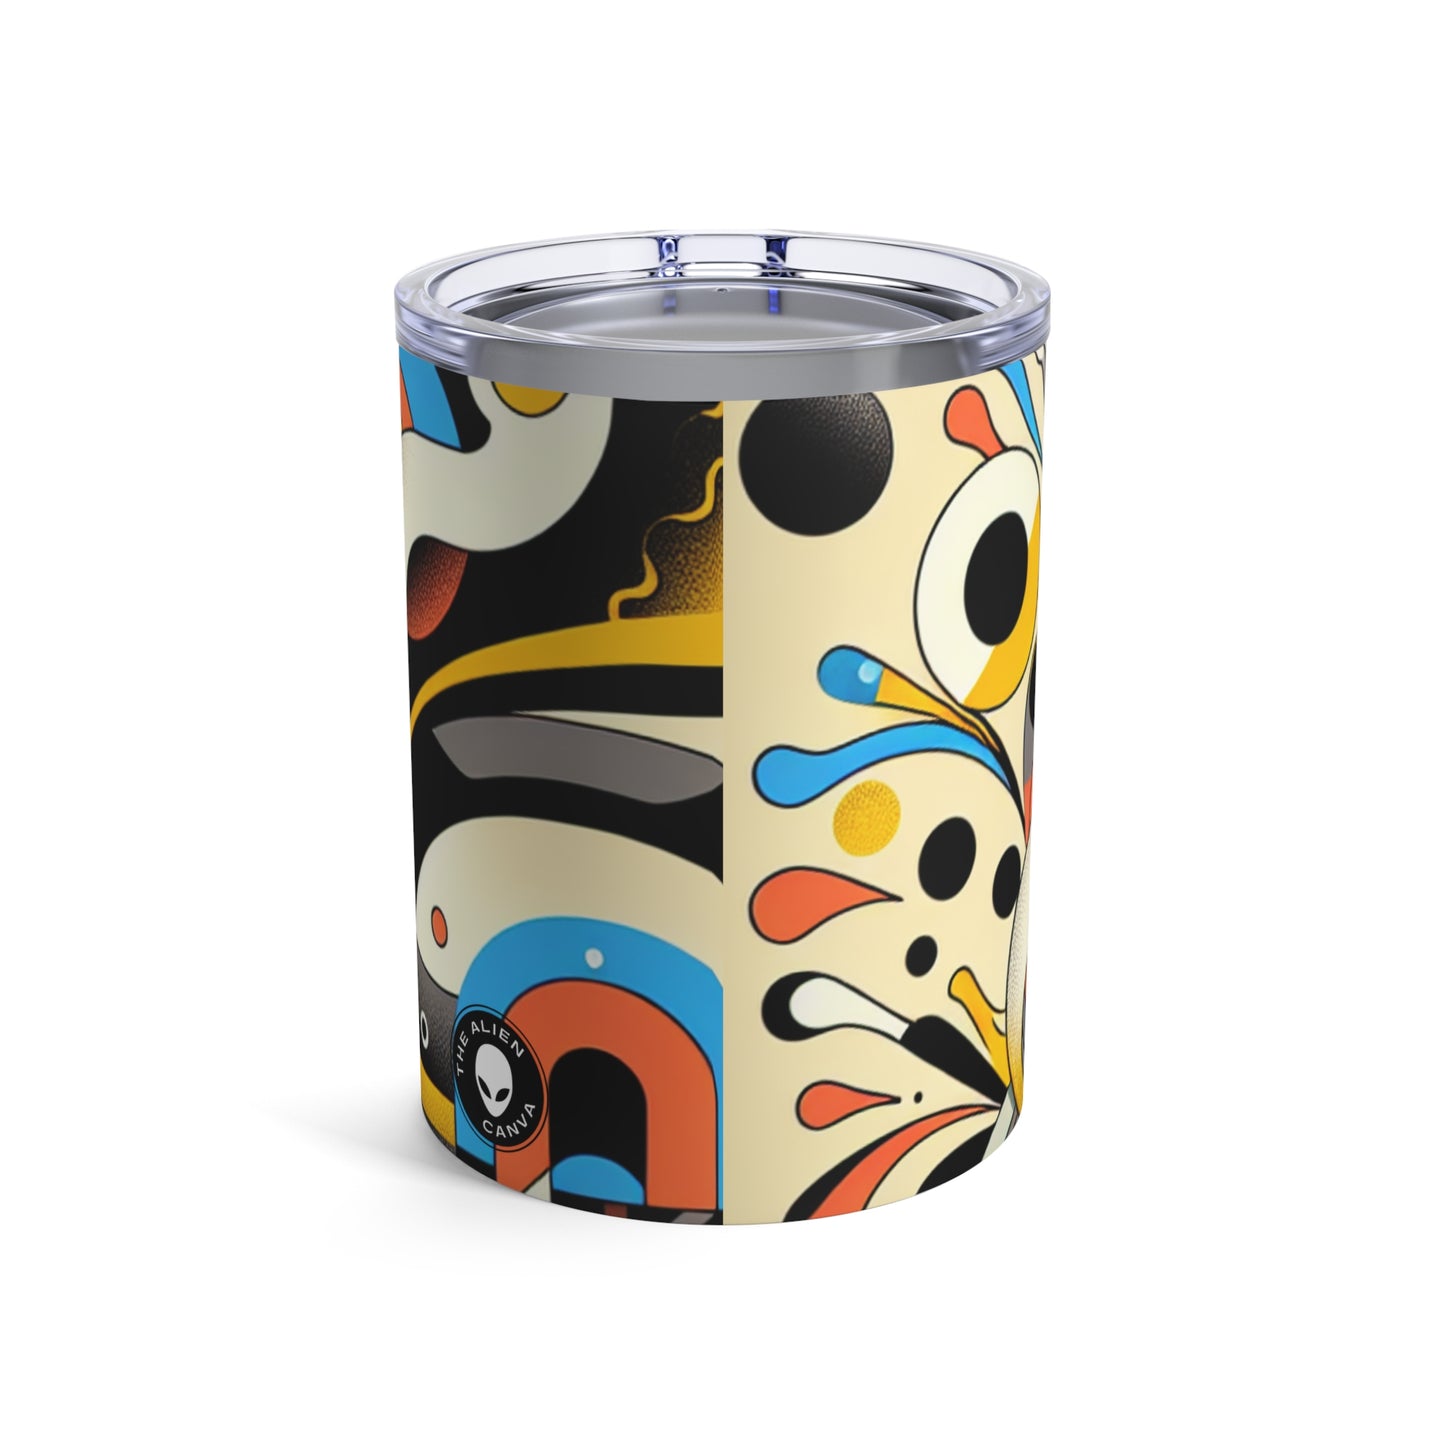 "Dada Fusion: A Whimsical Chaos of Everyday Objects" - The Alien Tumbler 10oz Neo-Dada